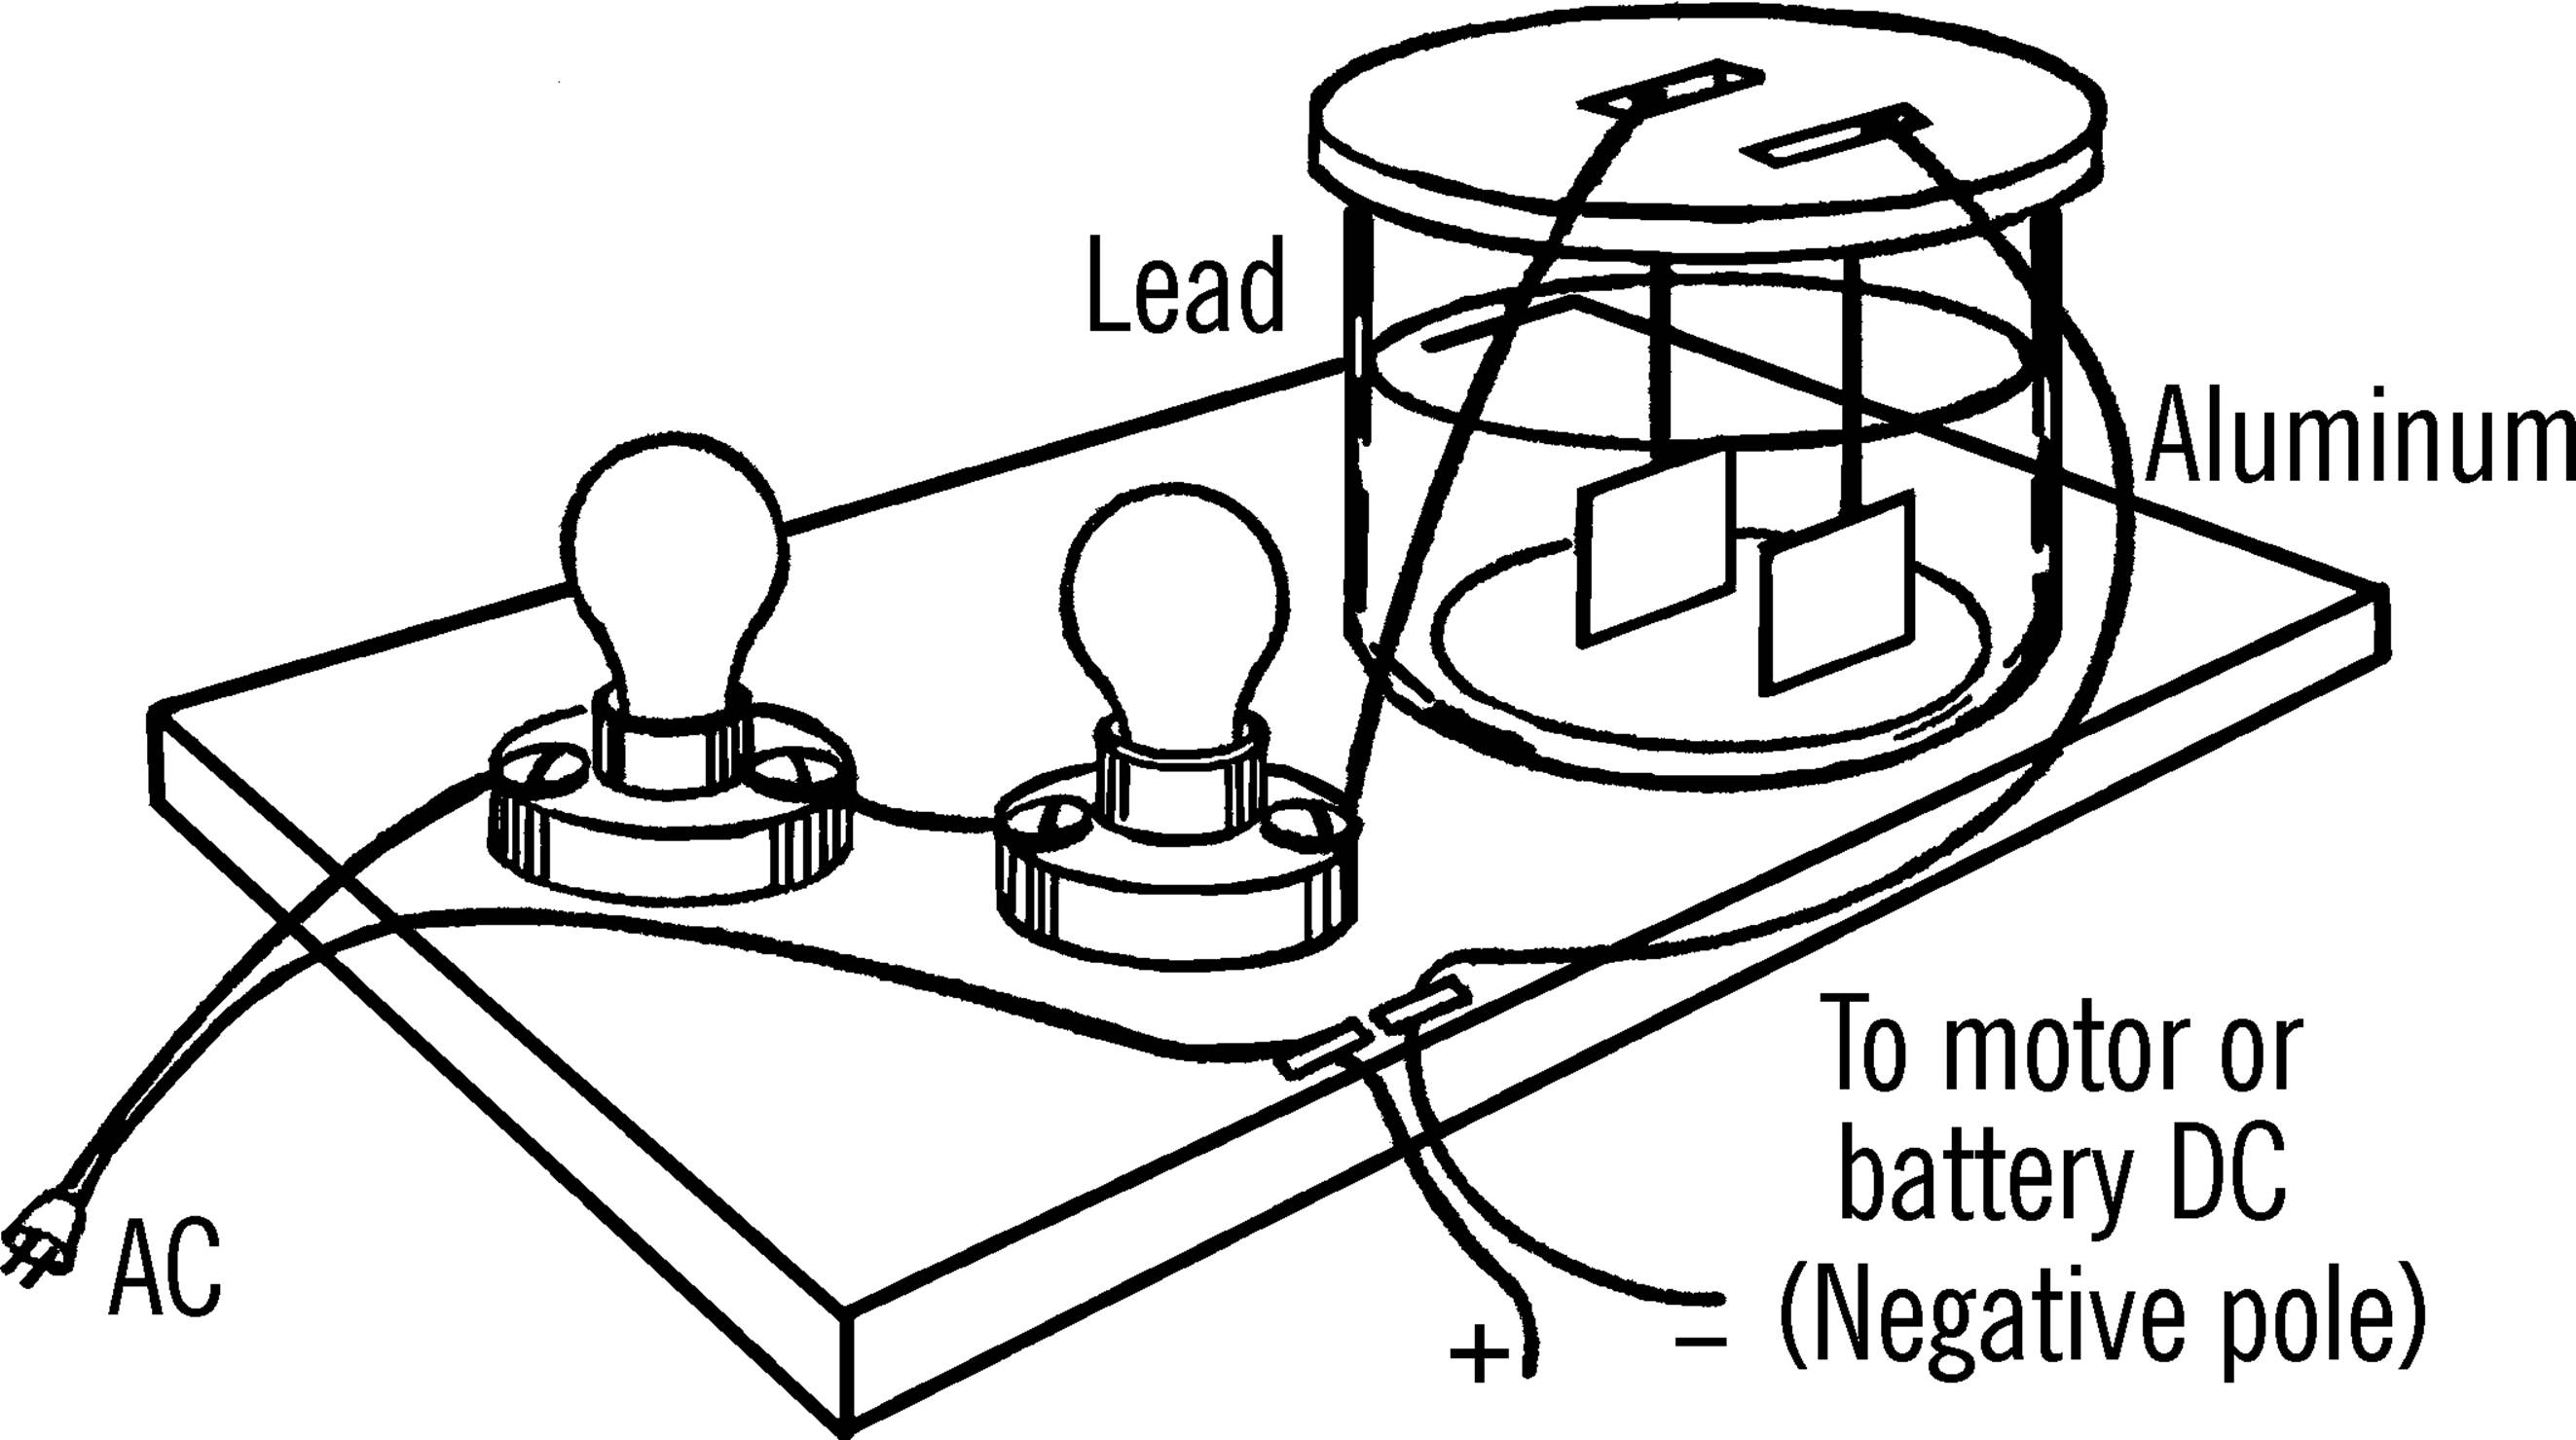 Lamp bank rectifier and battery charger.